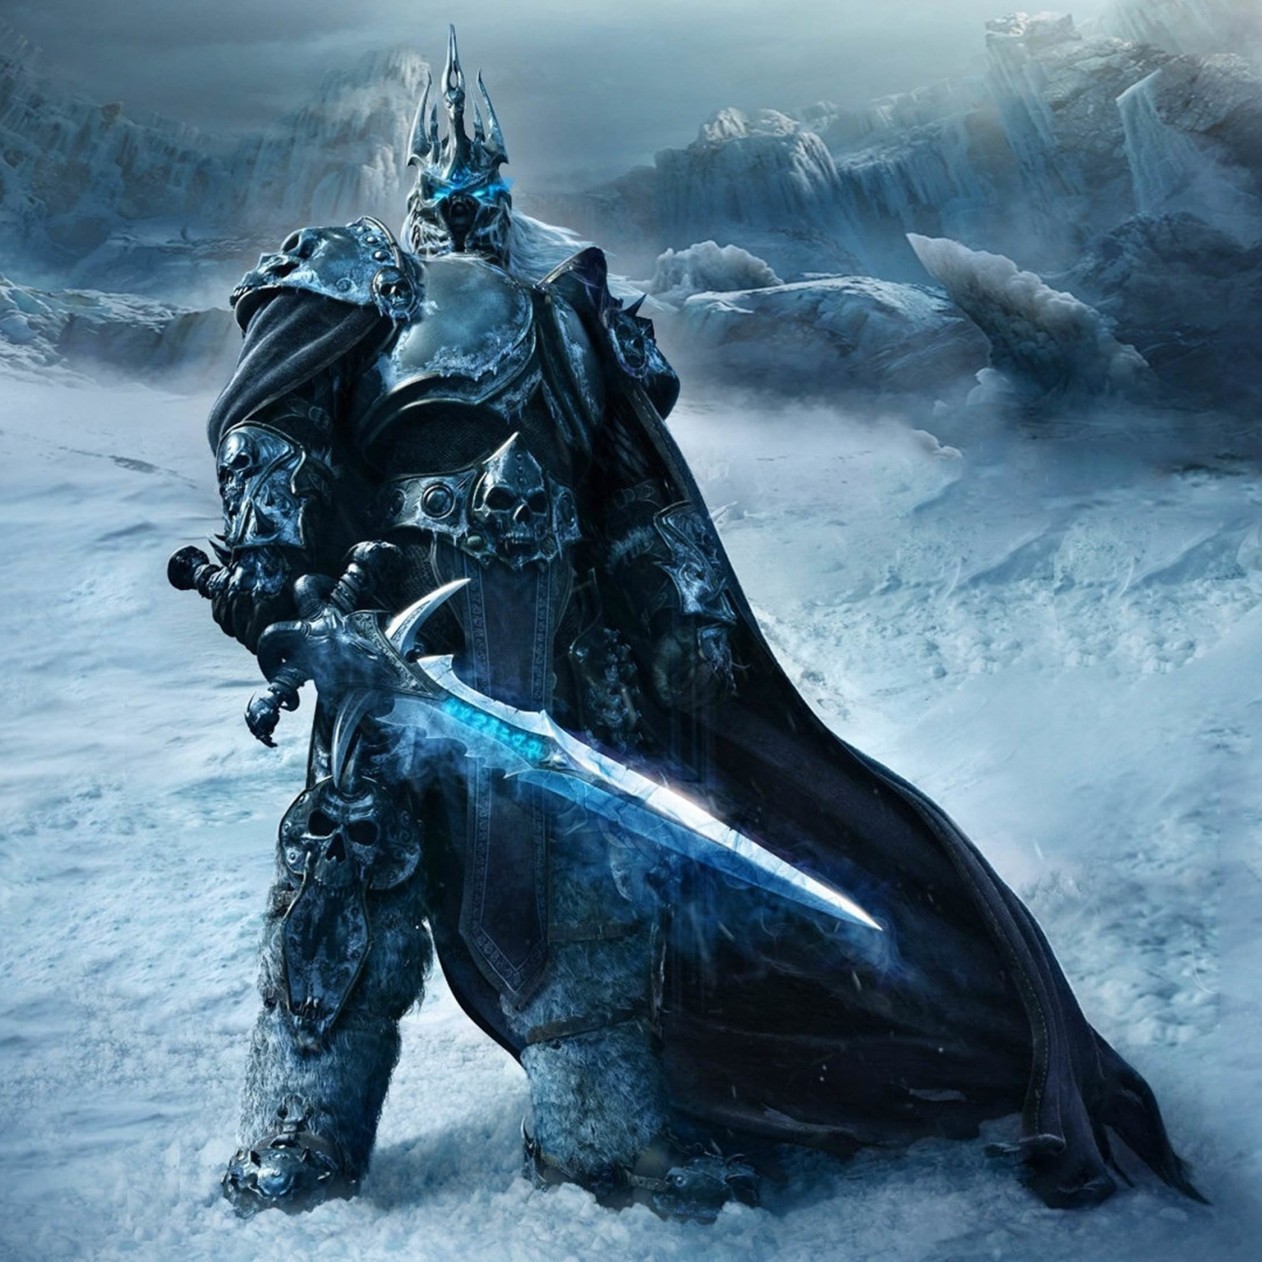 World of Warcraft: Wrath of the Lich King Wallpaper for Apple iPad mini